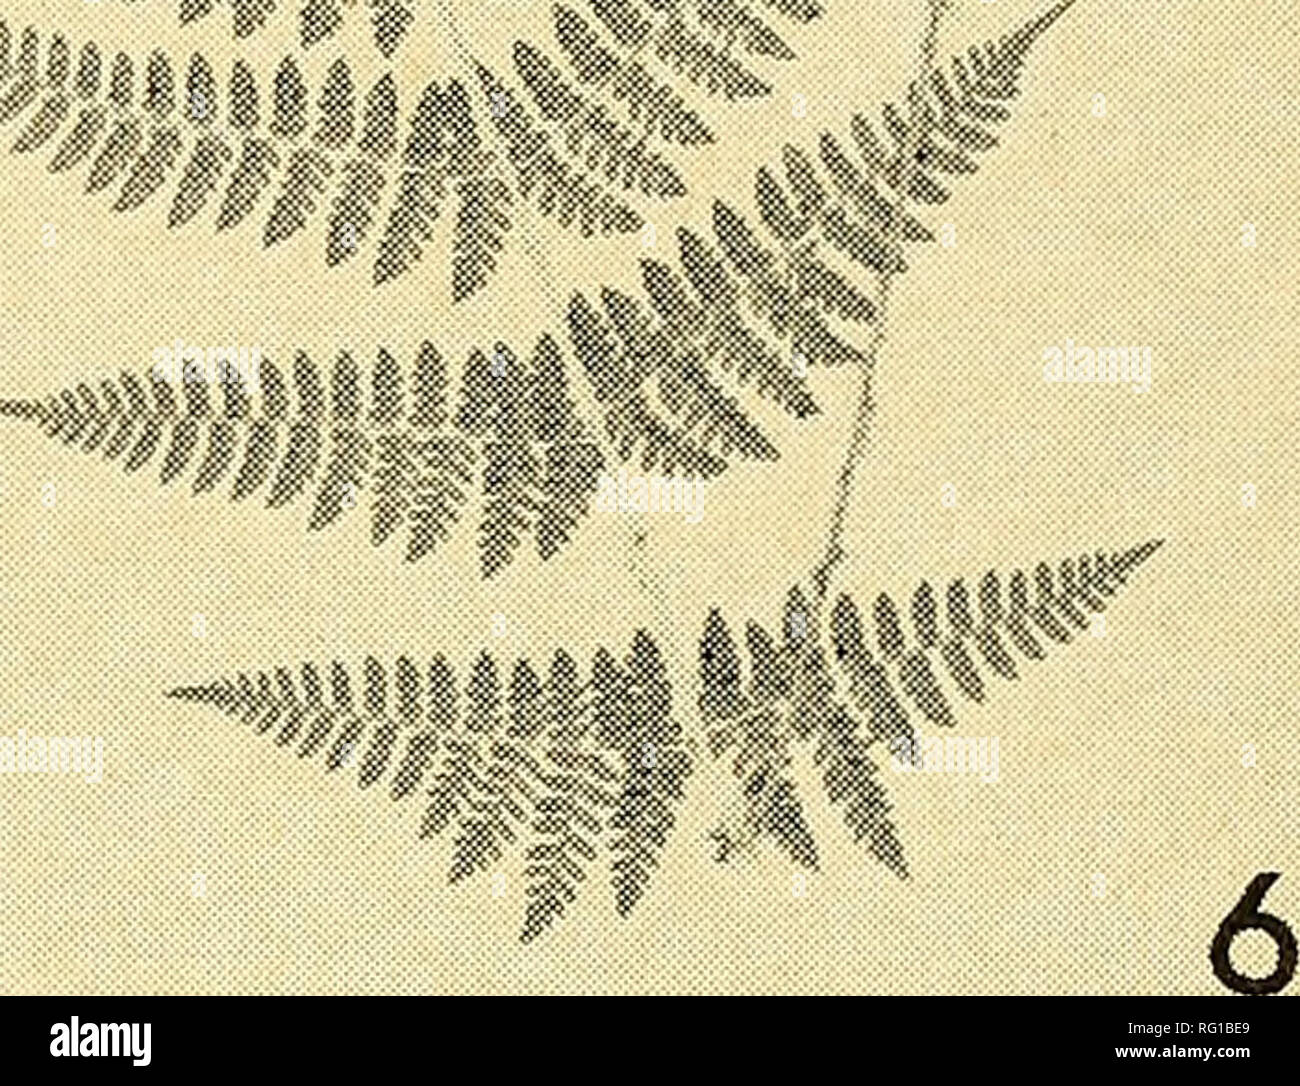 . The Canadian field-naturalist. . Figure 5. Dryopteris spinidosa Watt, Britton 1714, Montana, Glacier National Park, June 27, 1969. Figure 6. Dryopteris intermedia Gray, Britton 582, Ontario, Grey Co., Skinner's Bluff, June 15, 1962. 18527 (GH) (Standley 1921), this species was not seen. No collections were made of Dryopteris in- termedia in Idaho and Montana. Circumstan- tial evidence of its absence at John's Lake and Lake McDonald was indicated in that no Dry- opteris intermedia X spinidosa (Dryopteris X triploidea Wherry) were present in, or near the large colonies of Dryopteris spinulosa. Stock Photo